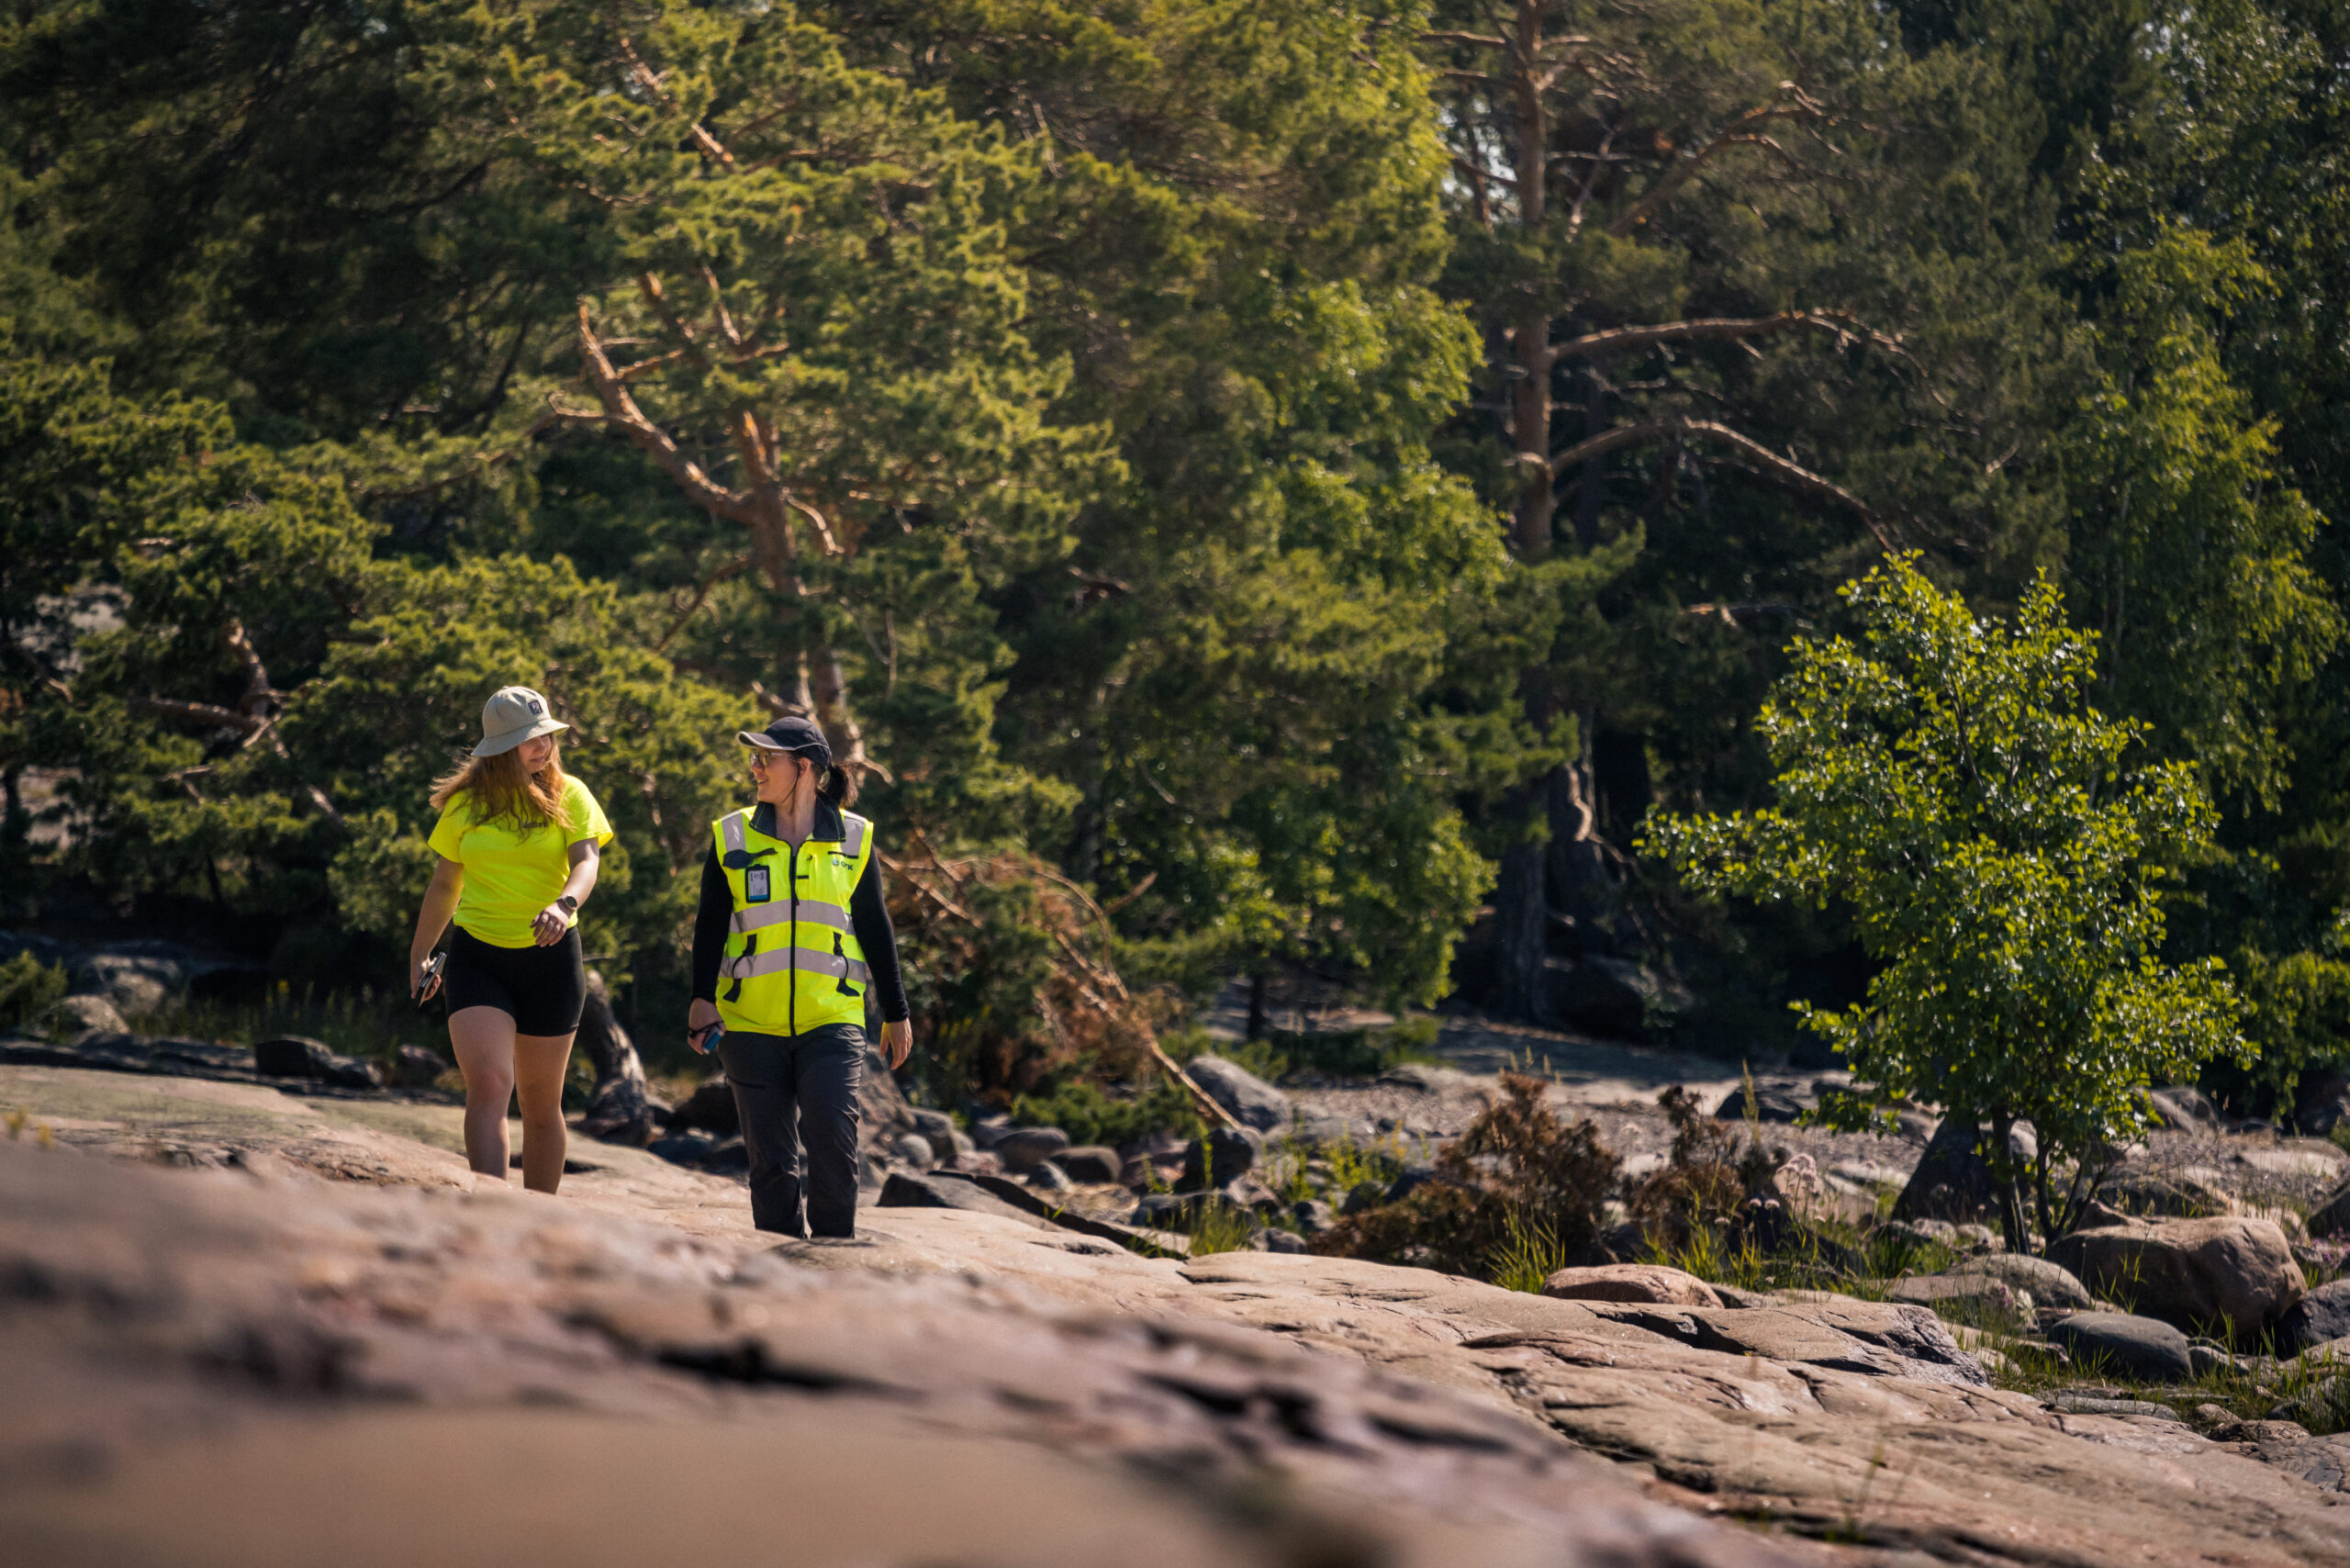 Two people walking on the rocks with safety vests talking to each other